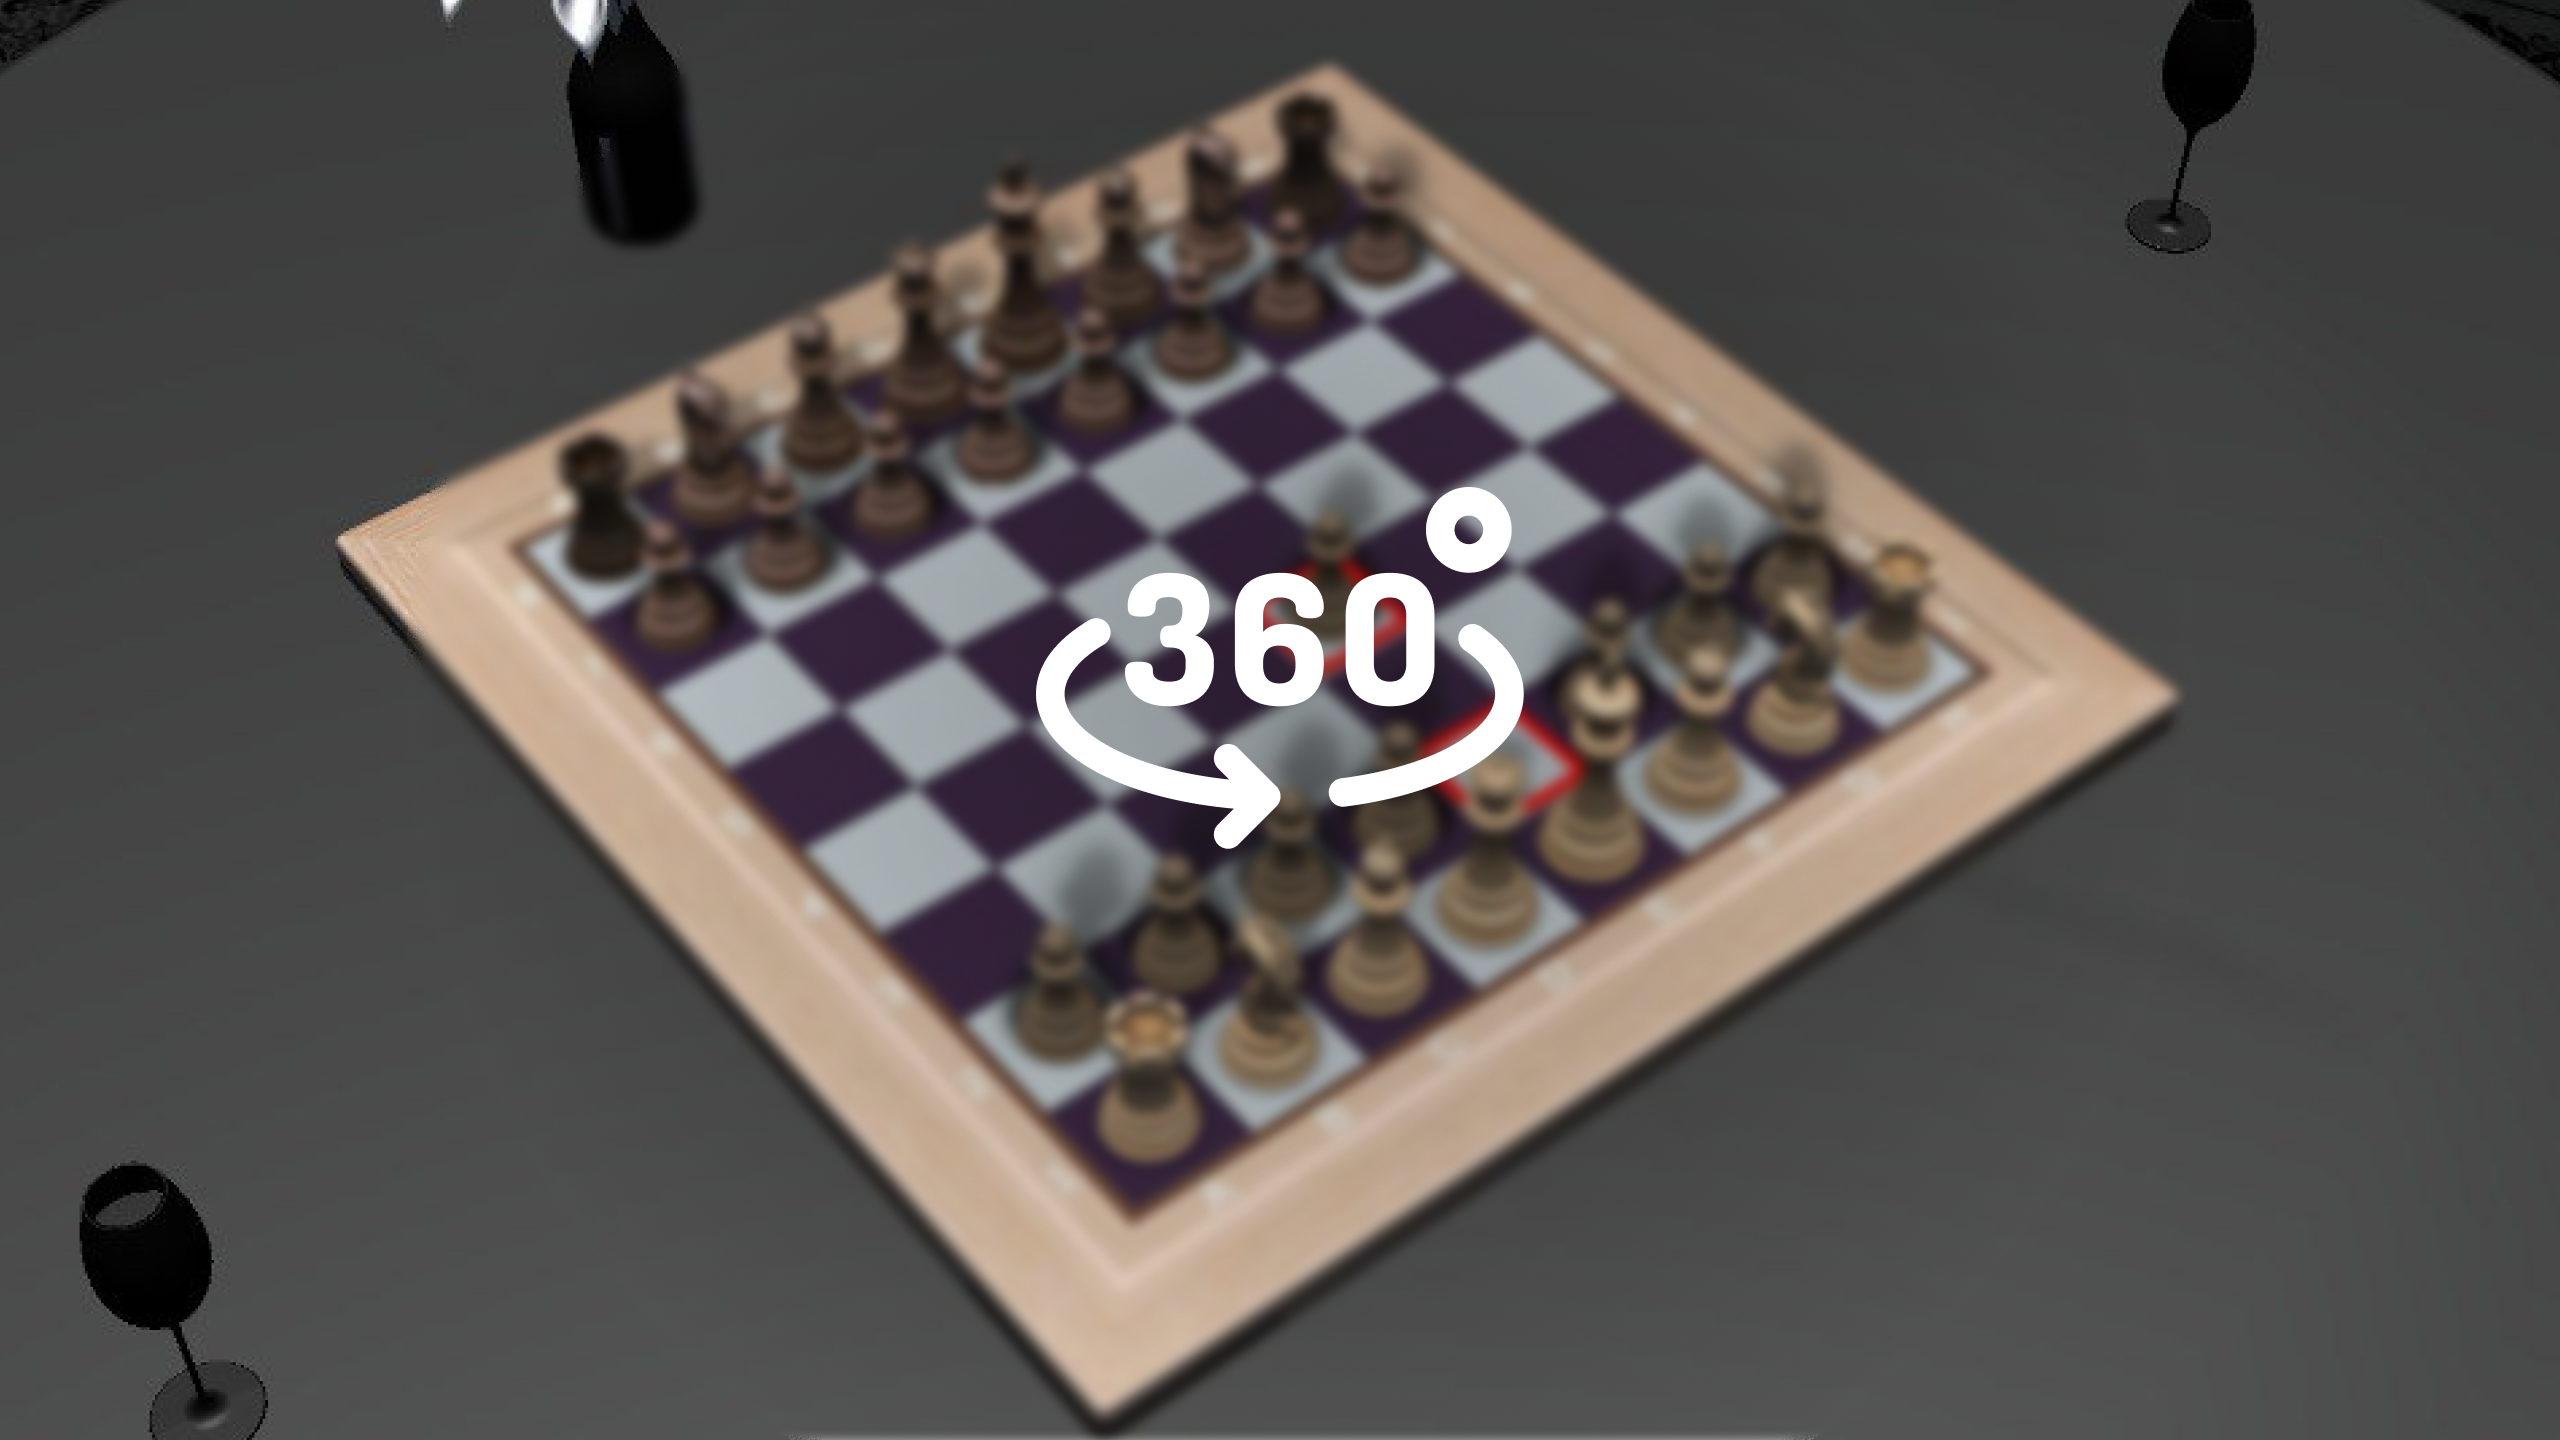 MasterMind Chess 3D for Android - Free App Download